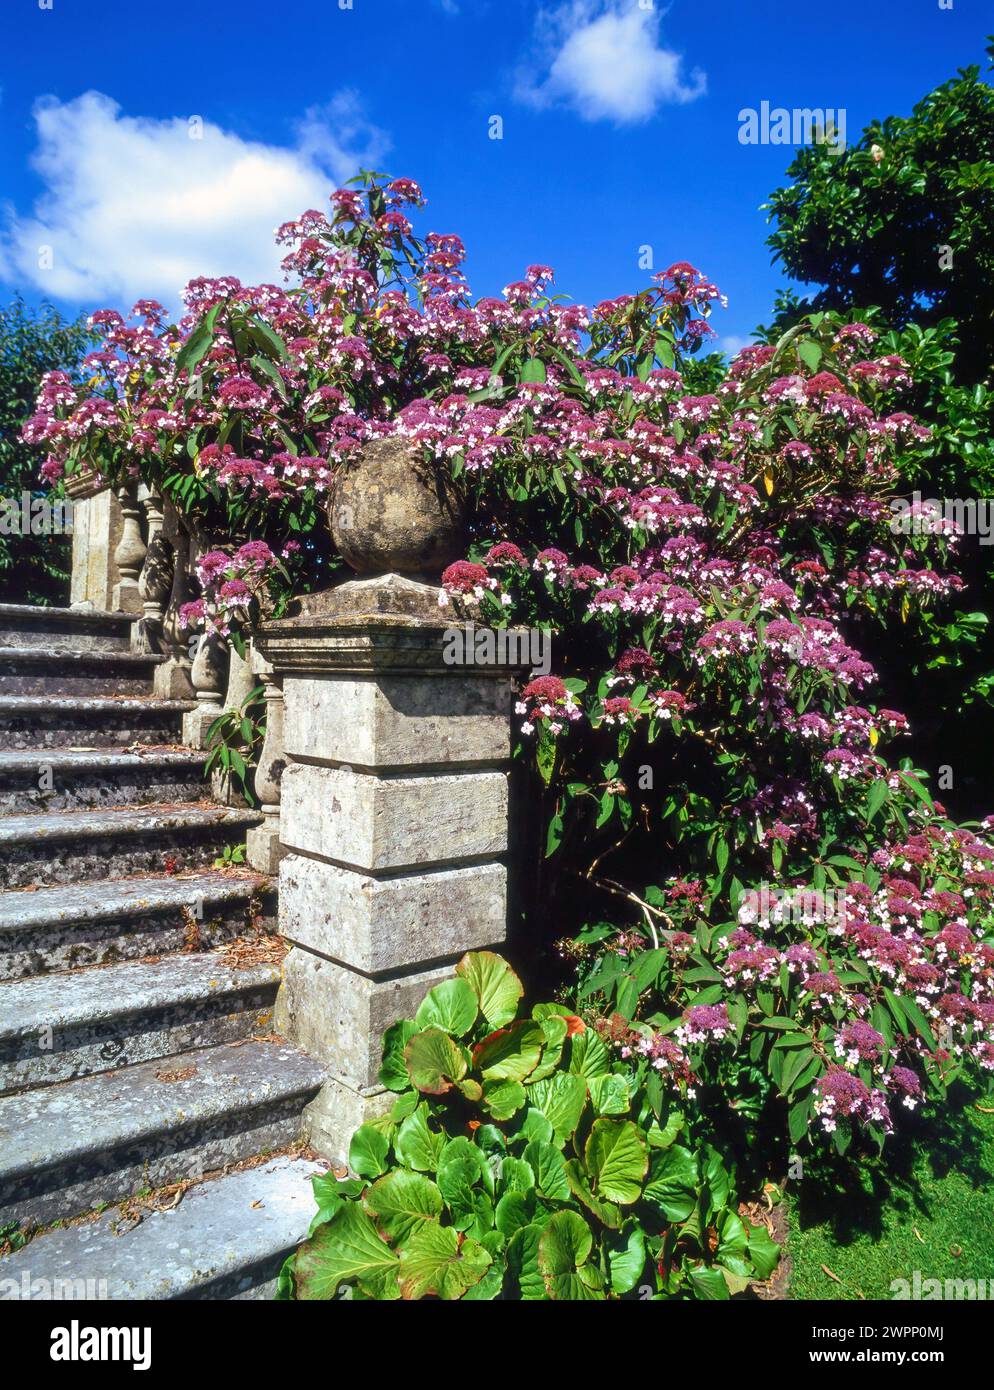 Hydrangea villosa 'Velvet and Lace' plant in full bloom and growing by ornate stone garden steps with balustrade in English garden, England, UK Stock Photo